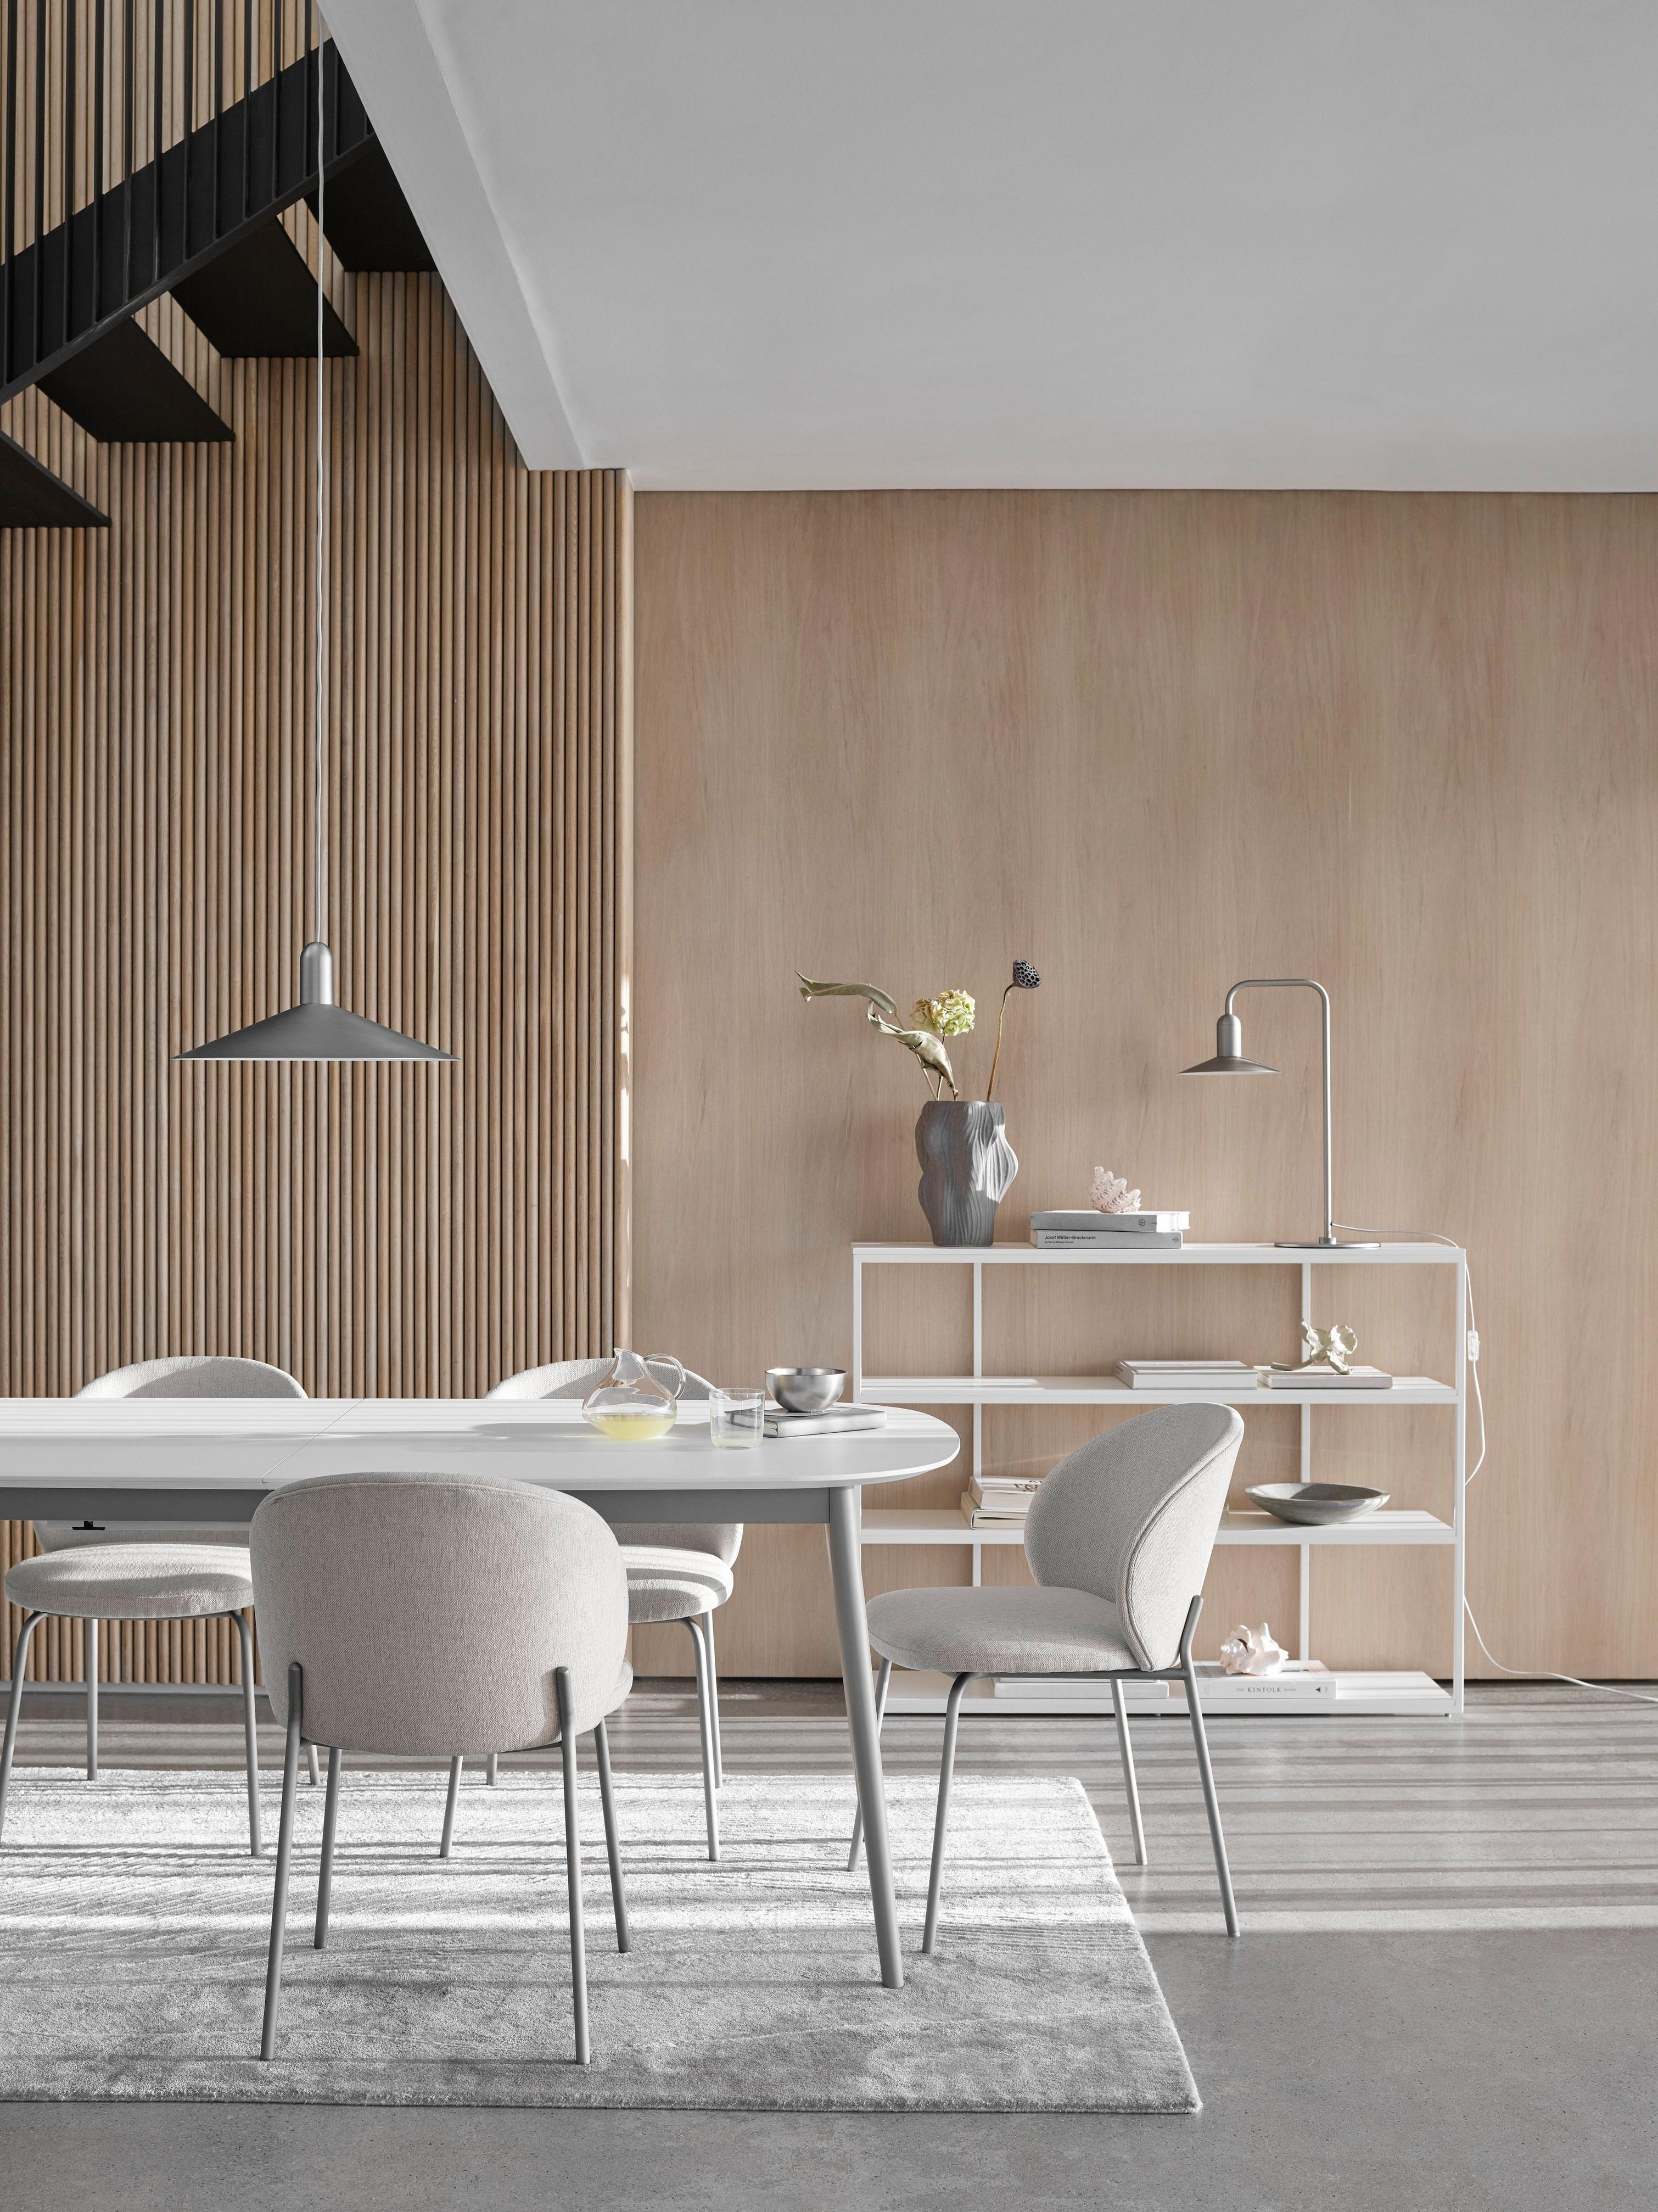 Modern dining room with light chairs, table, pendant light, and shelving against wooden slatted wall.